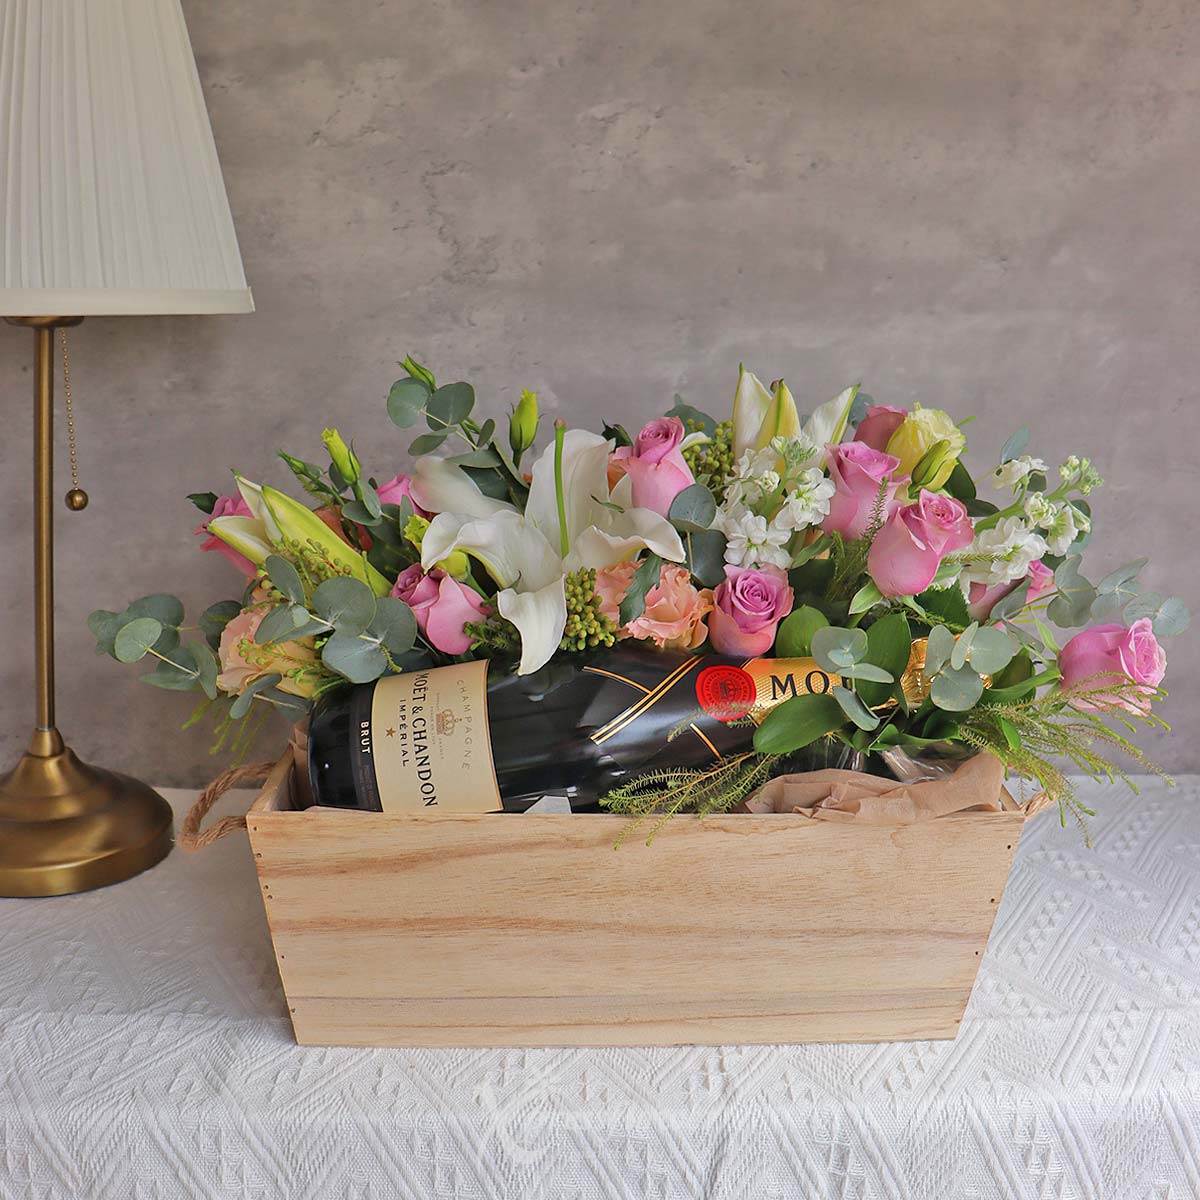 CW2305_Floral Reserve Roses Lilies with Moet Chandon Brut Champagne 3a